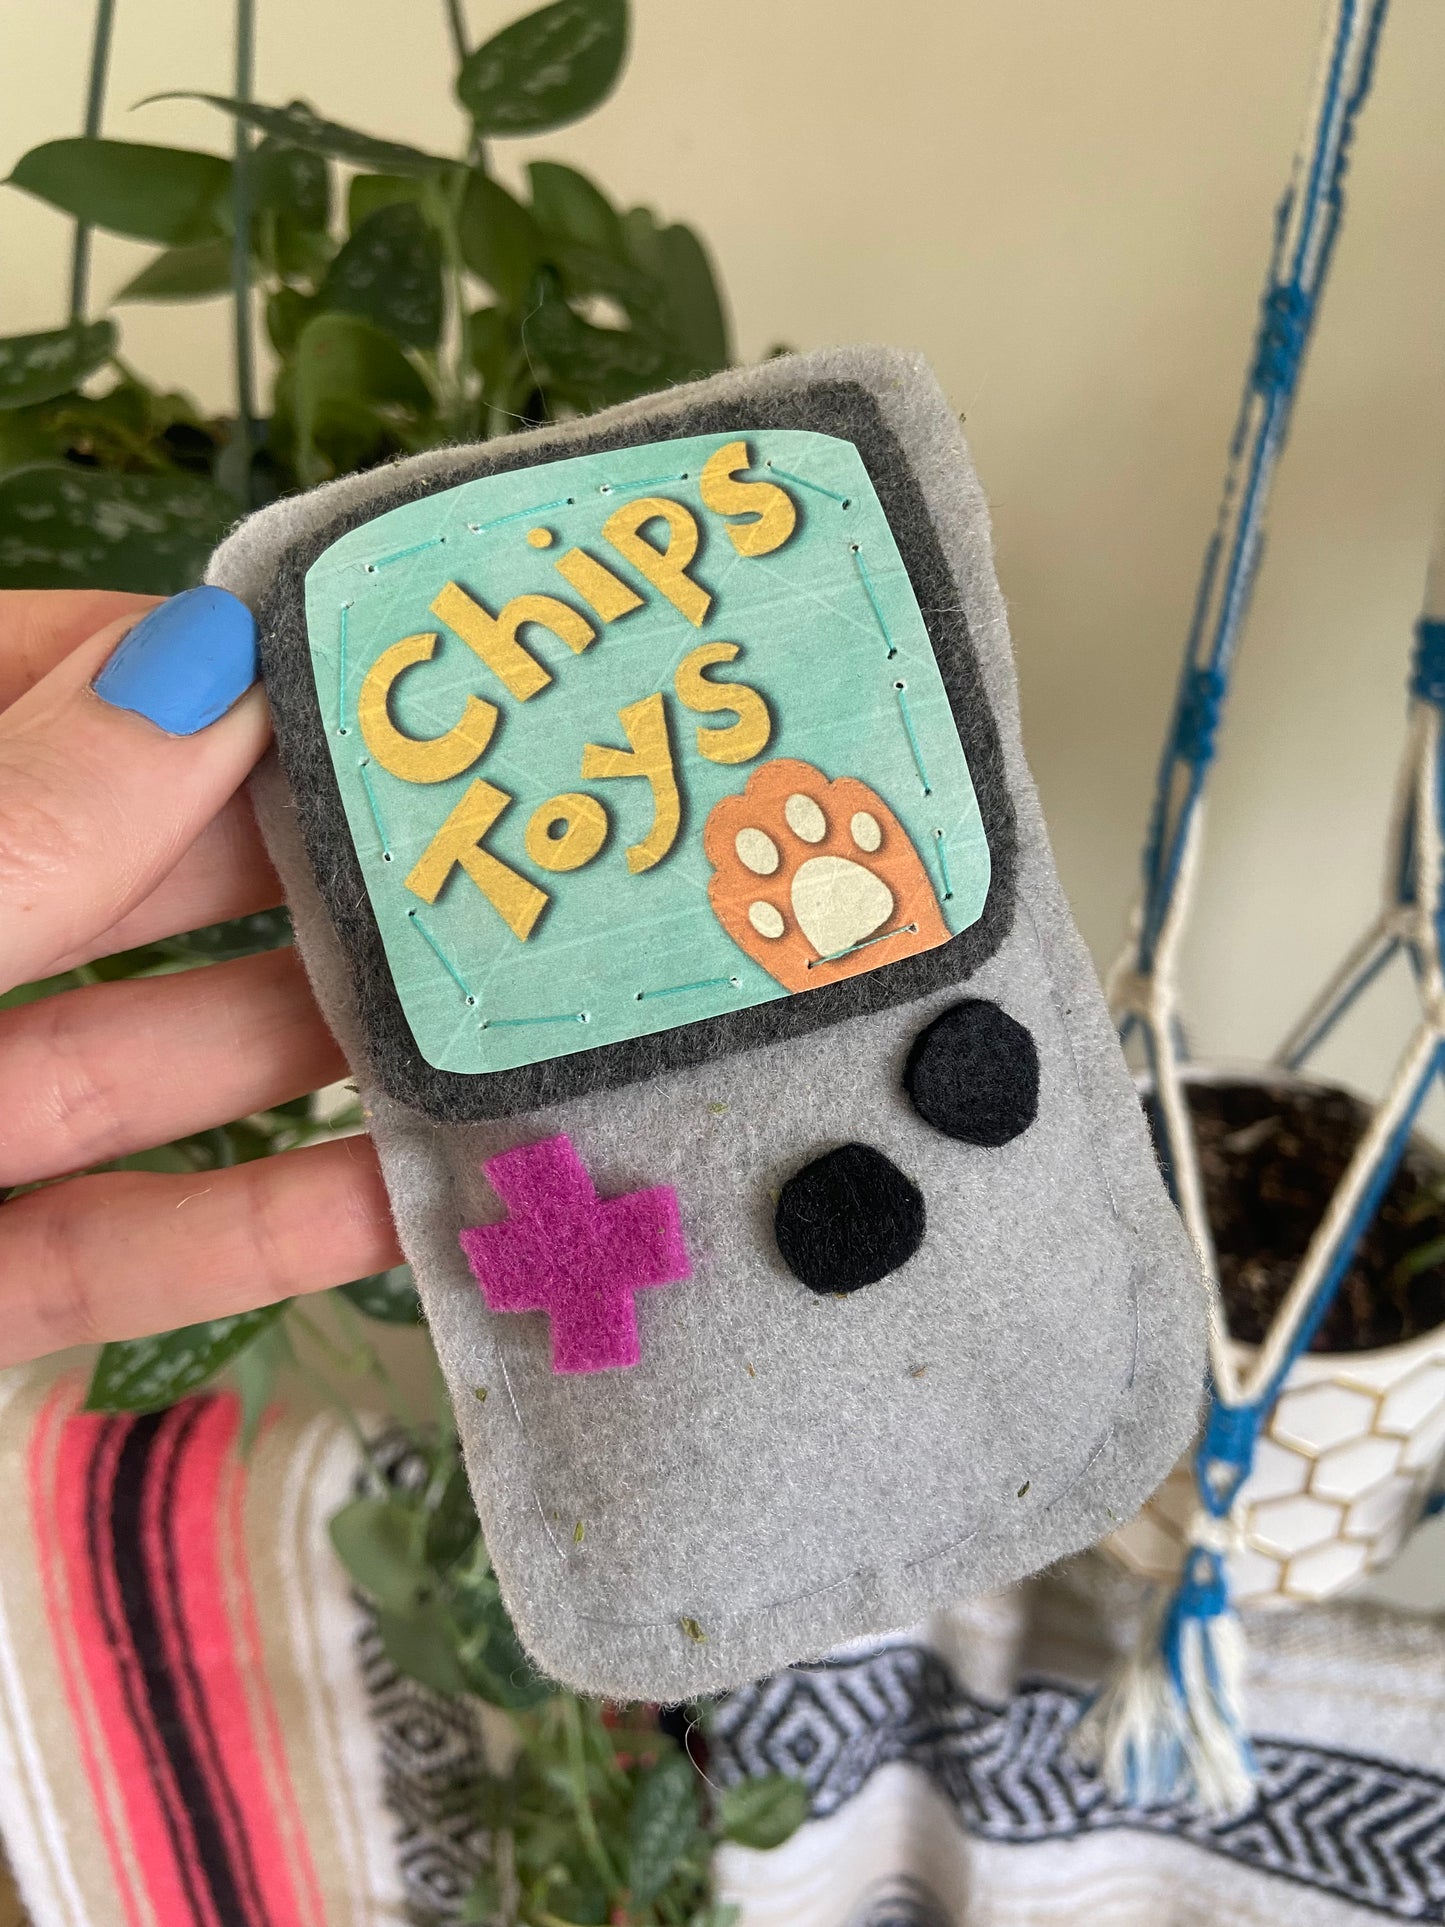 Limited Edition gaming catnip toy